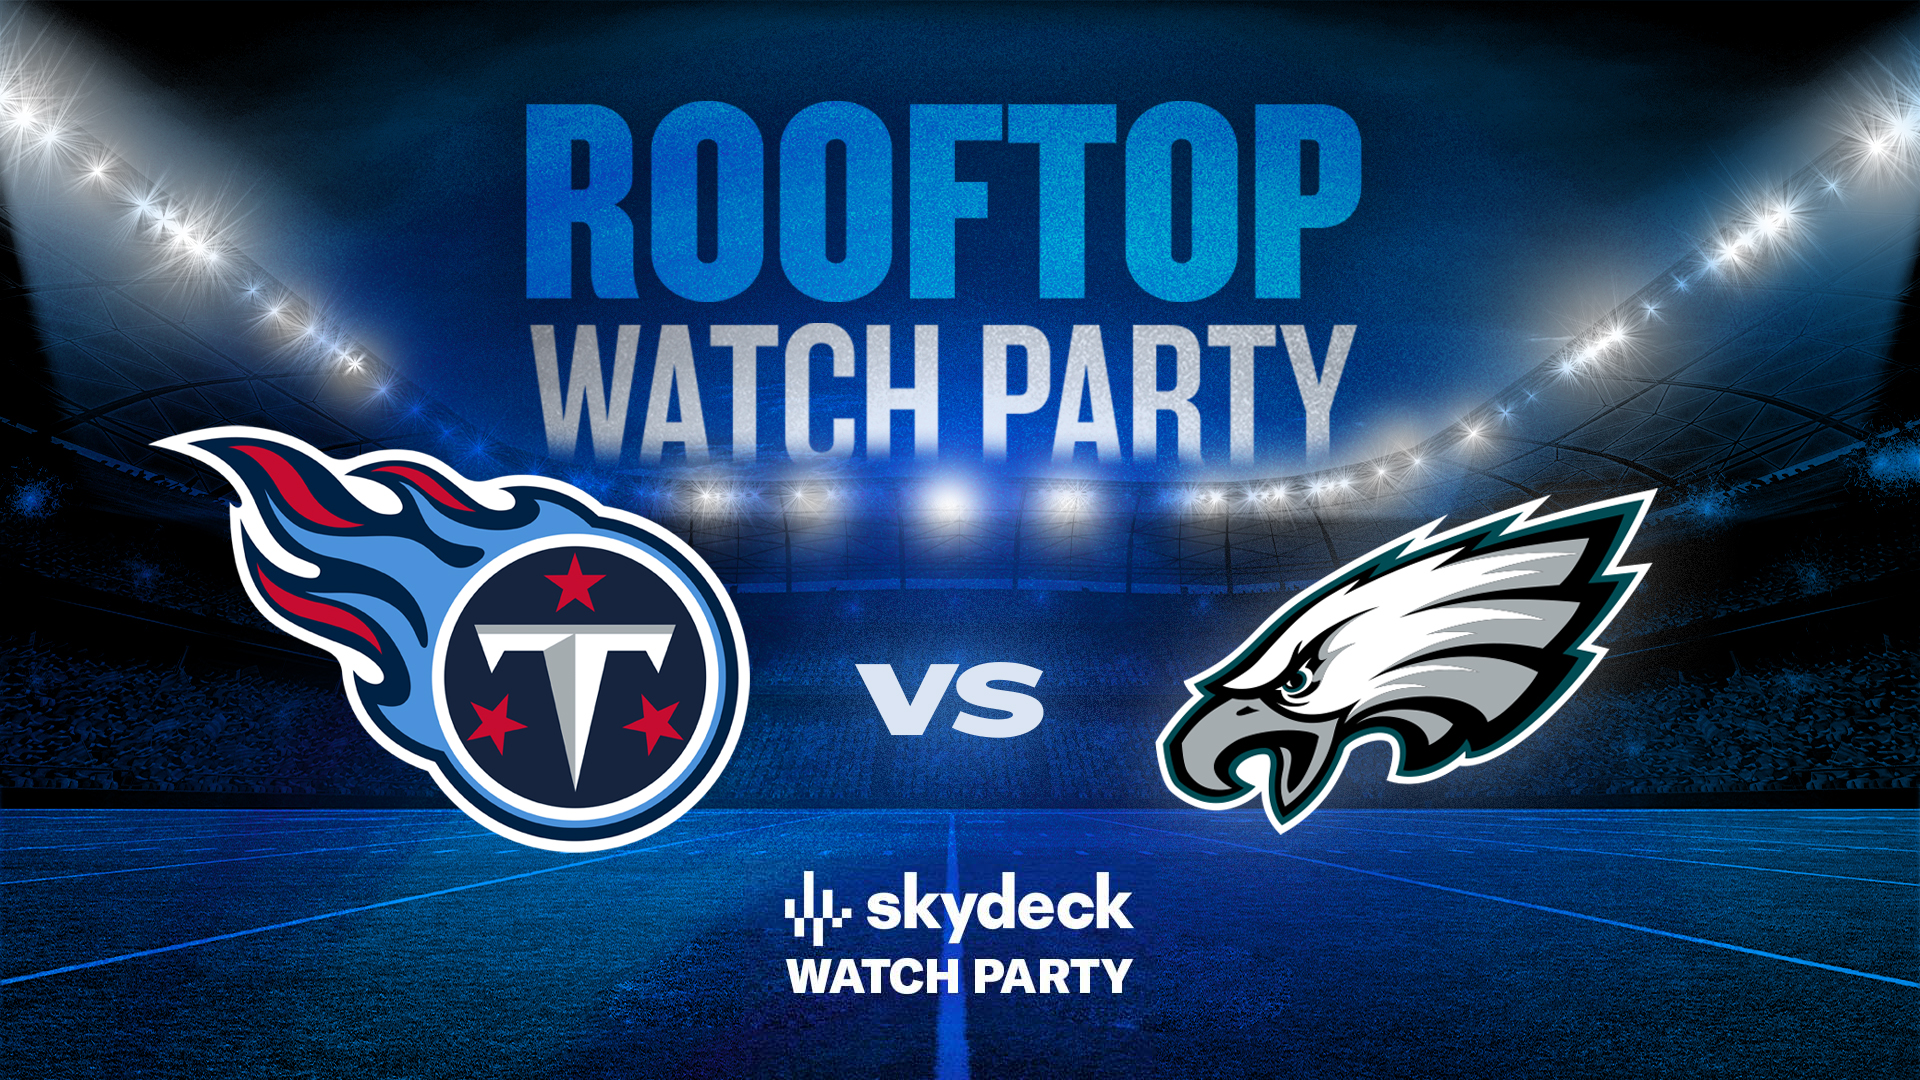 Titans vs. Eagles | Skydeck Watch Party - hero